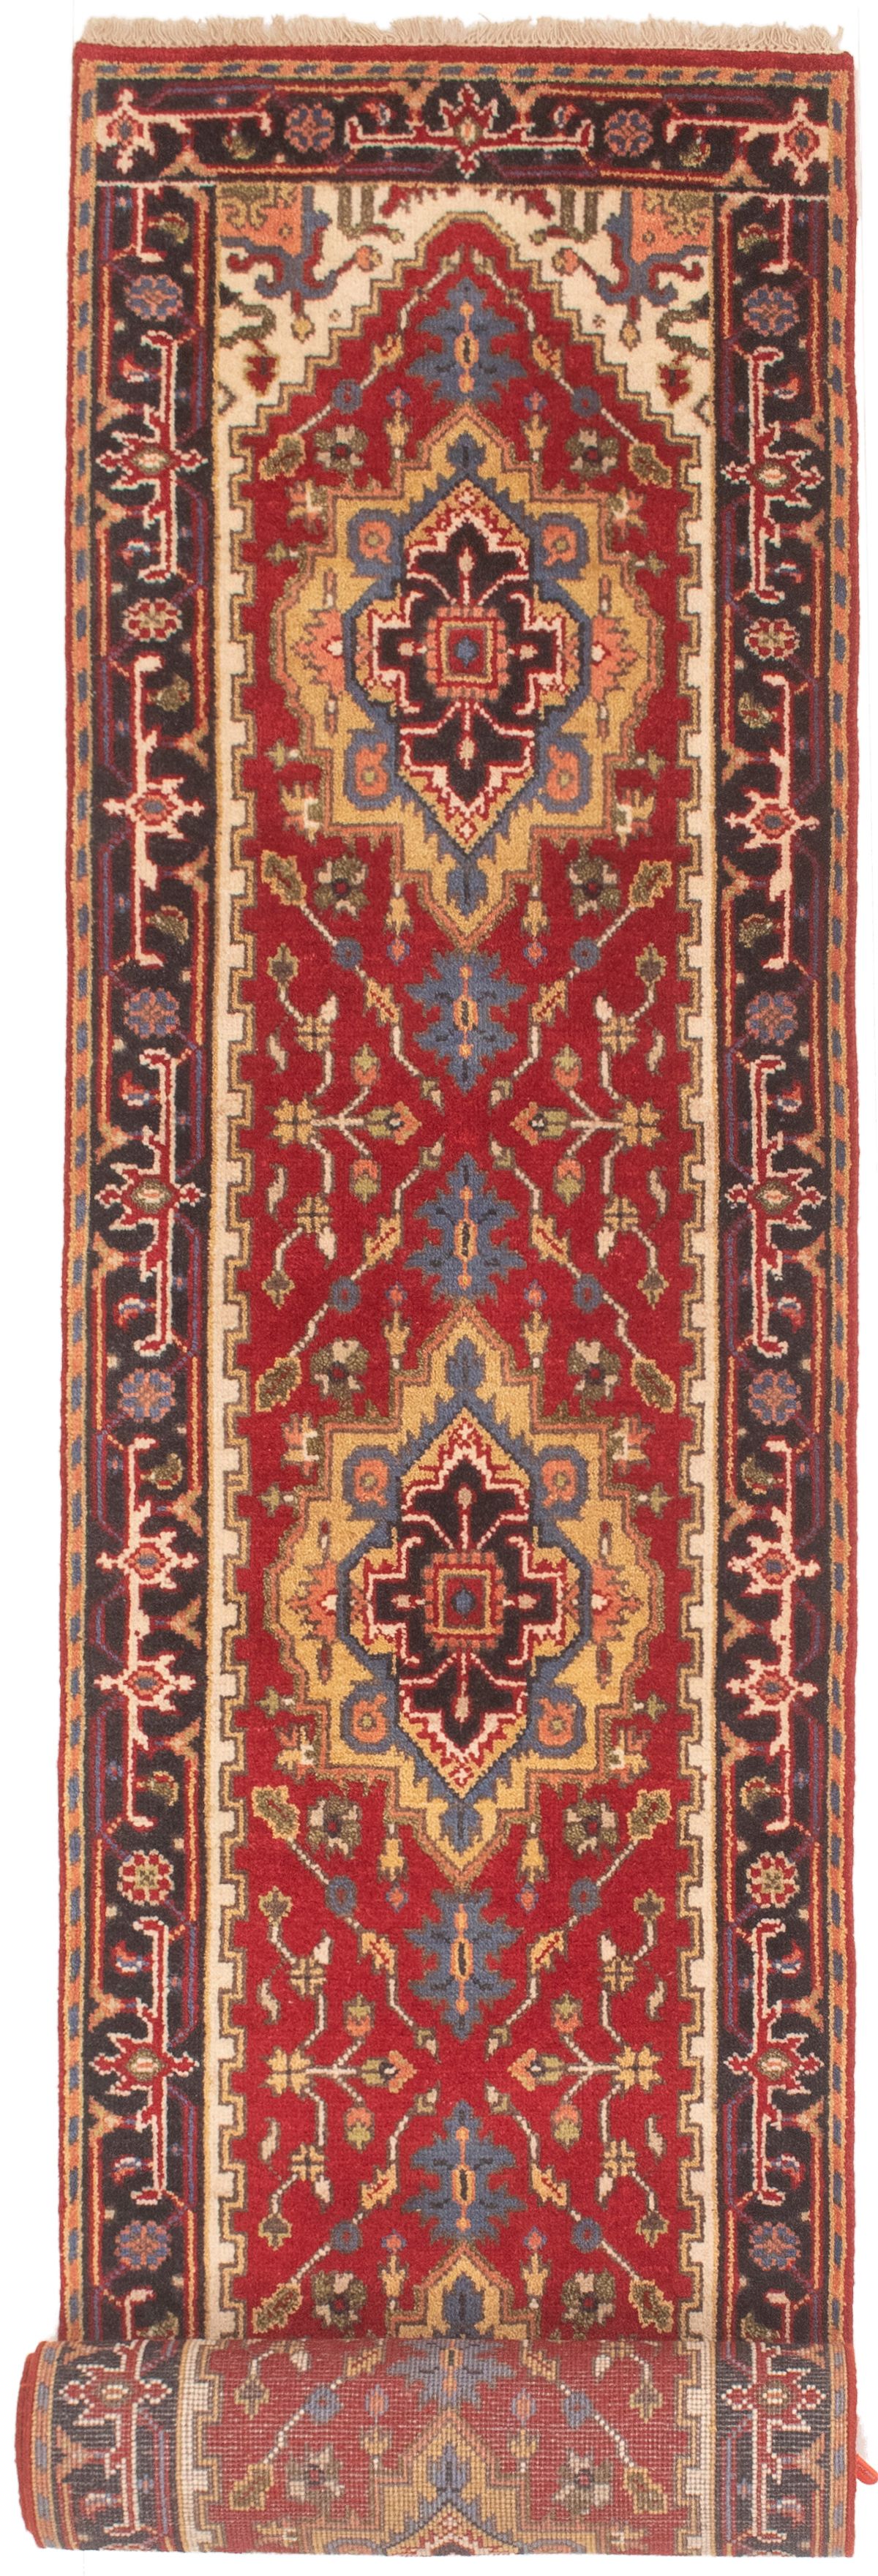 Hand-knotted Serapi Heritage Red Wool Rug 2'6" x 15'10"  Size: 2'6" x 15'10"  